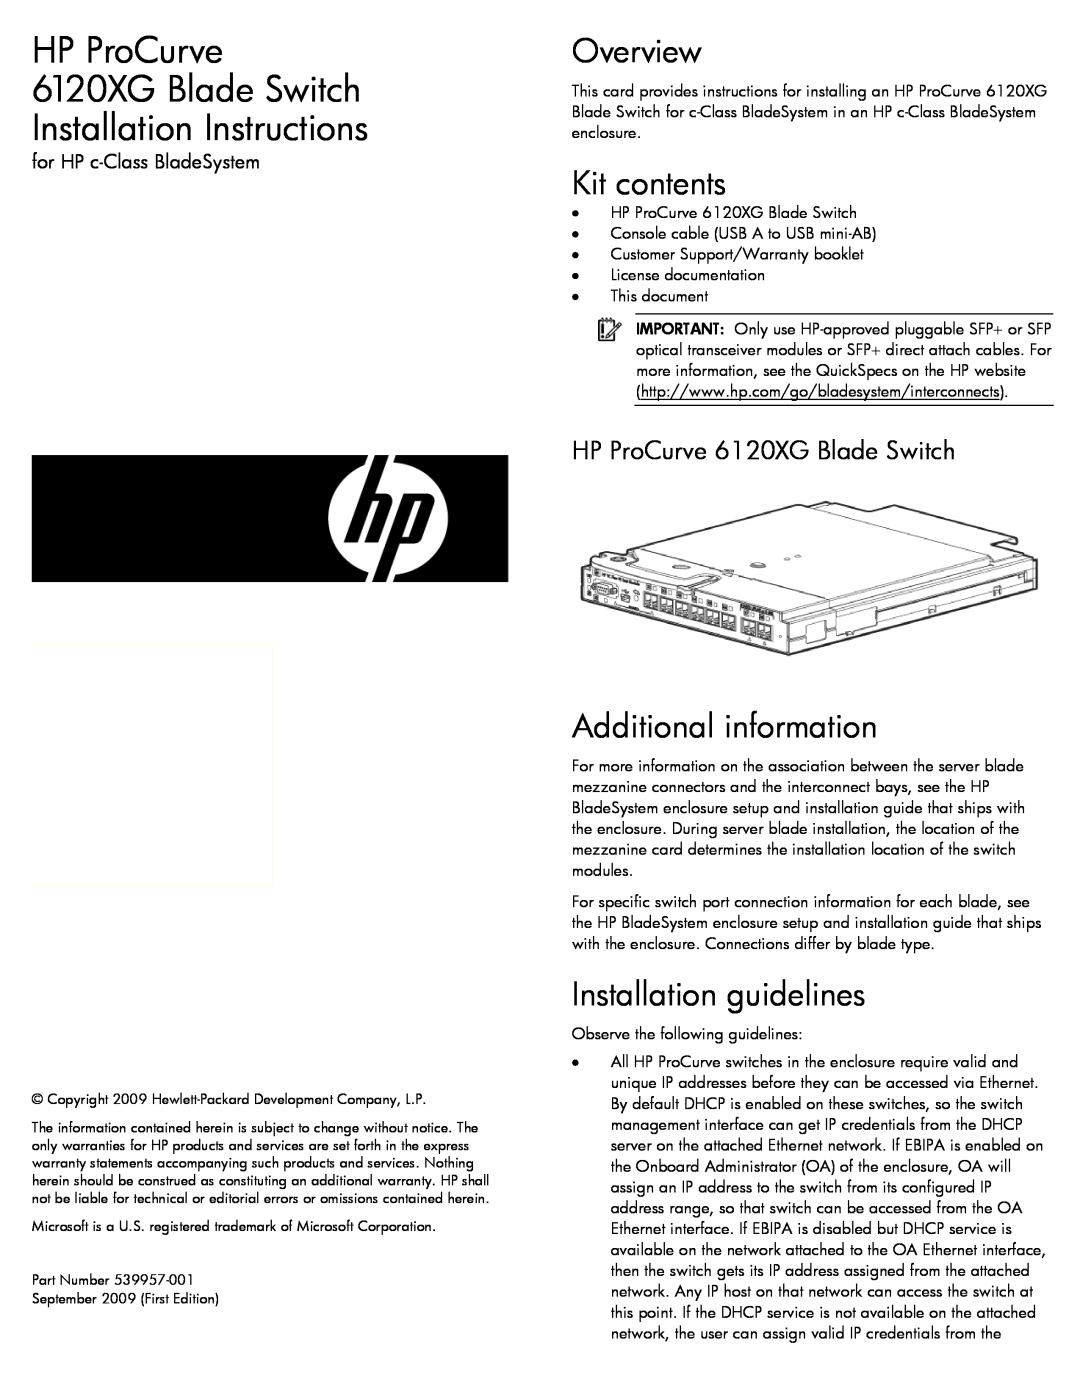 HP 516733B21 manual Overview, Kit contents, Additional information, Installation guidelines, for HP c-Class BladeSystem 